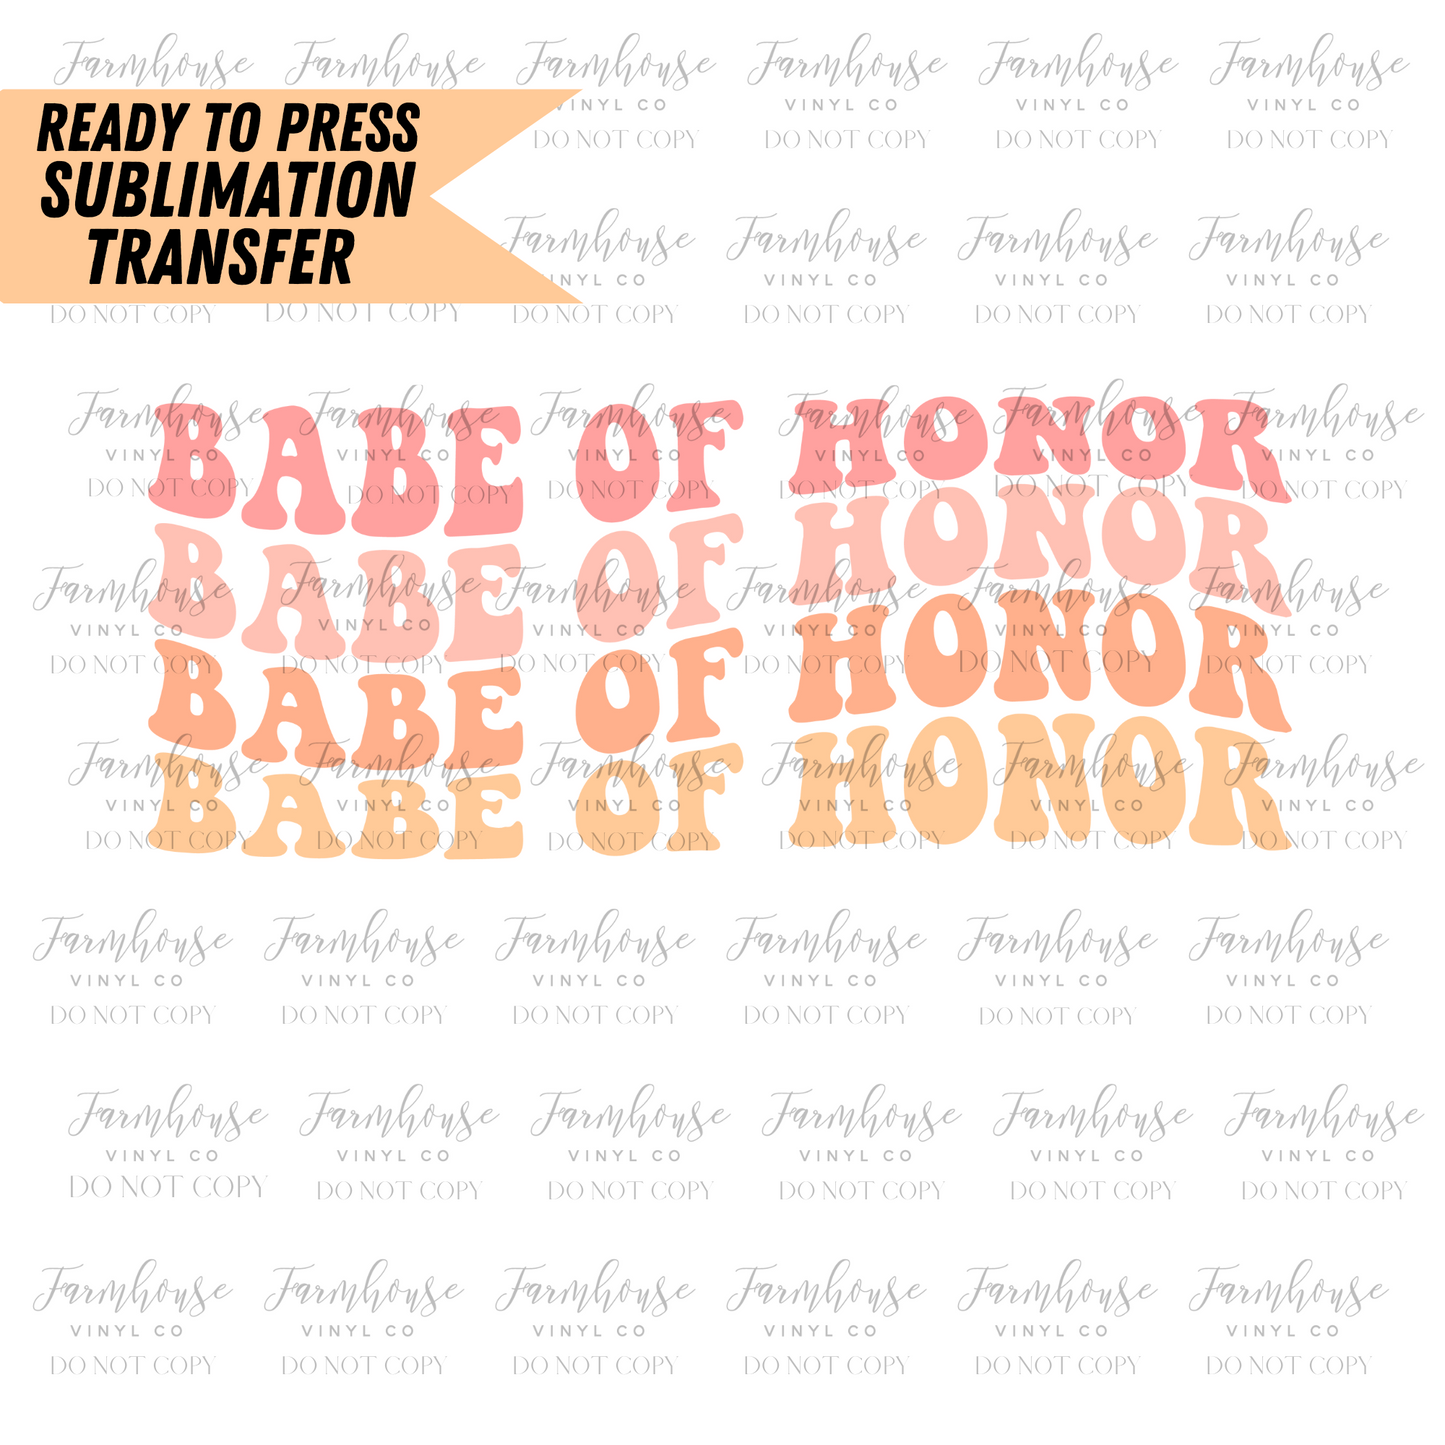 Babes And Babe Of Honor Ready To Press Sublimation Transfer